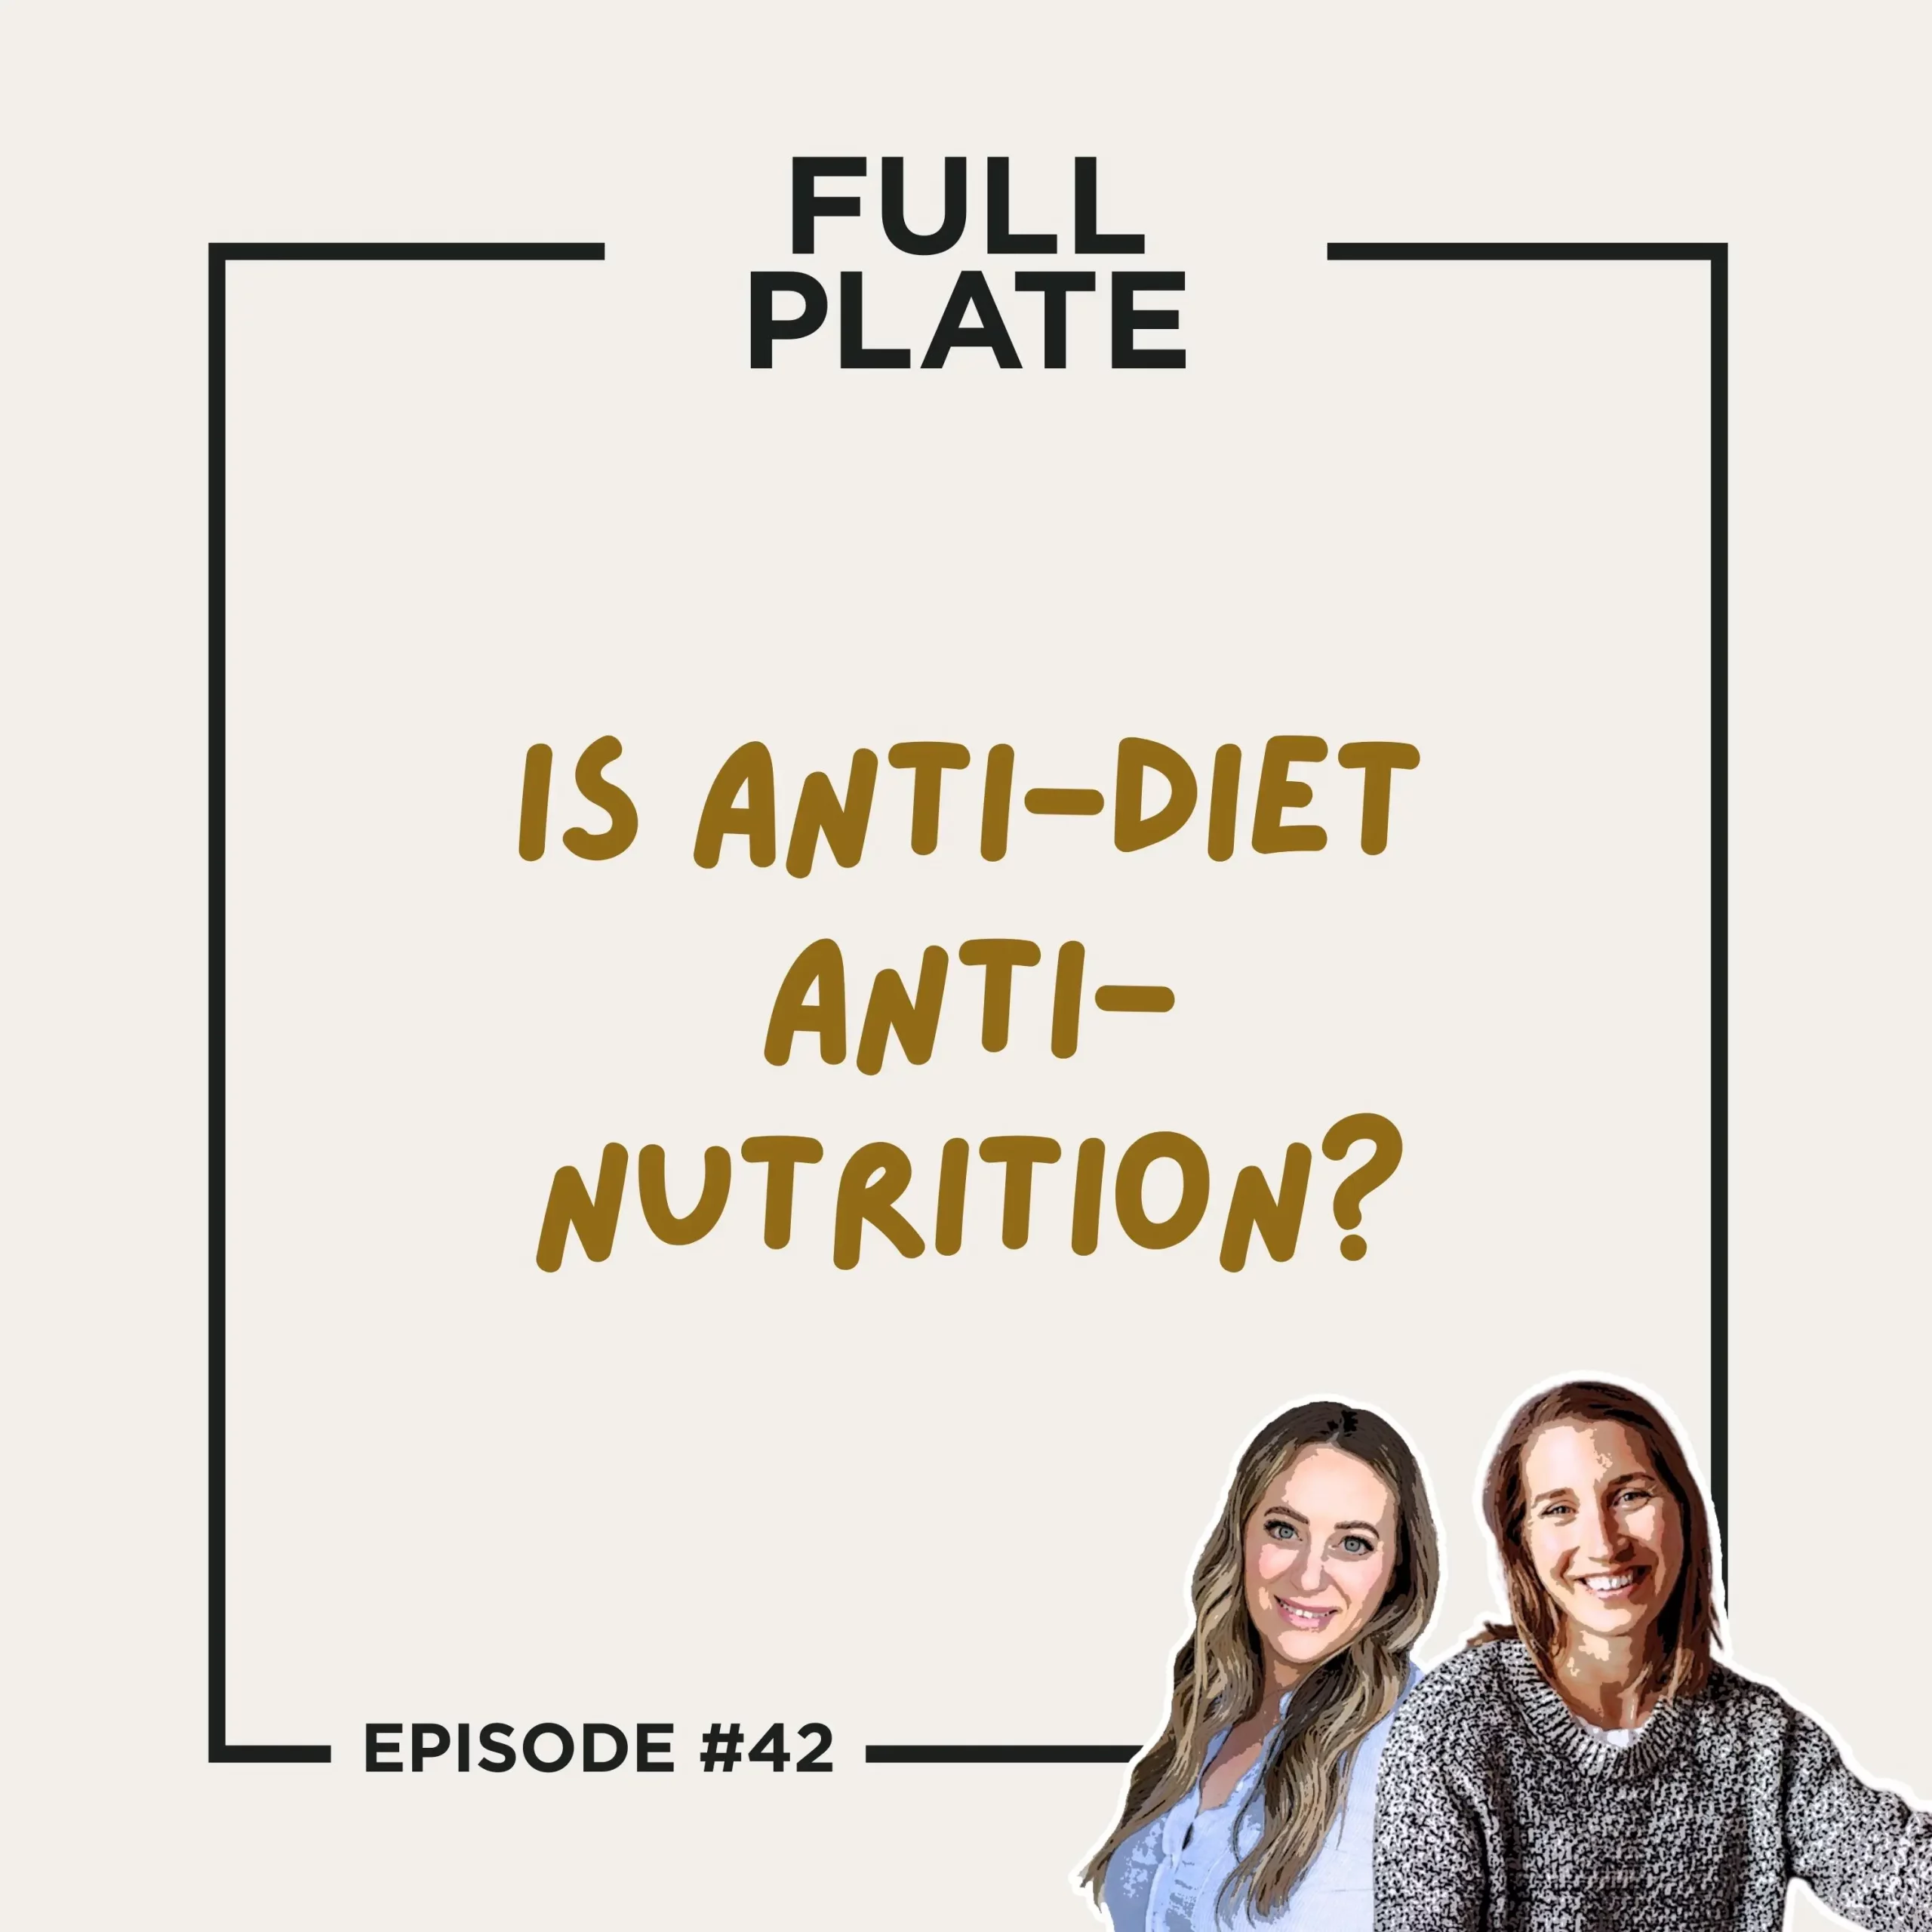 Full Plate Podcast | Ditch diet culture, respect your body, and set boundaries | Episode 42: Is Anti-Diet Anti-Nutrition?